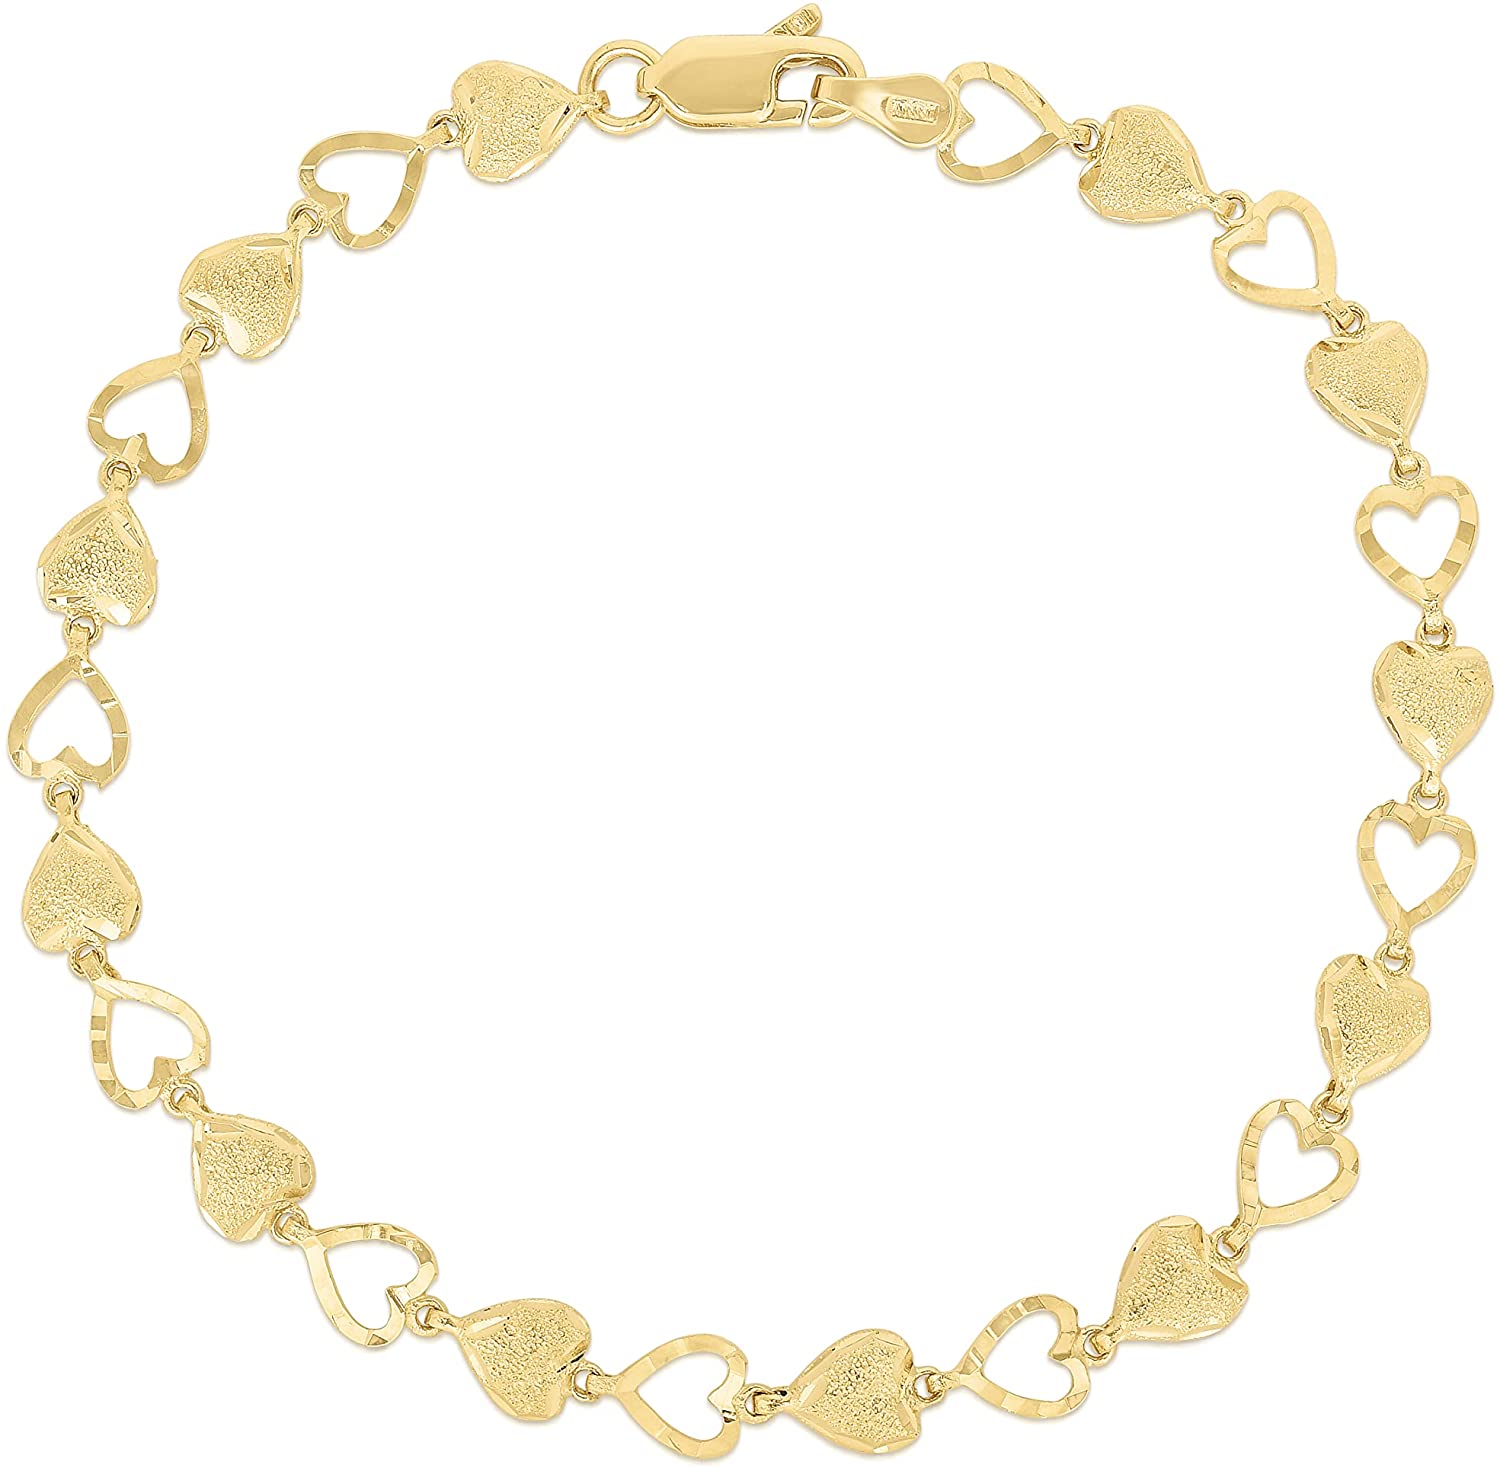 10k Yellow Gold Heart Shape with Open and Textured Finish Pattern Link Bracelet